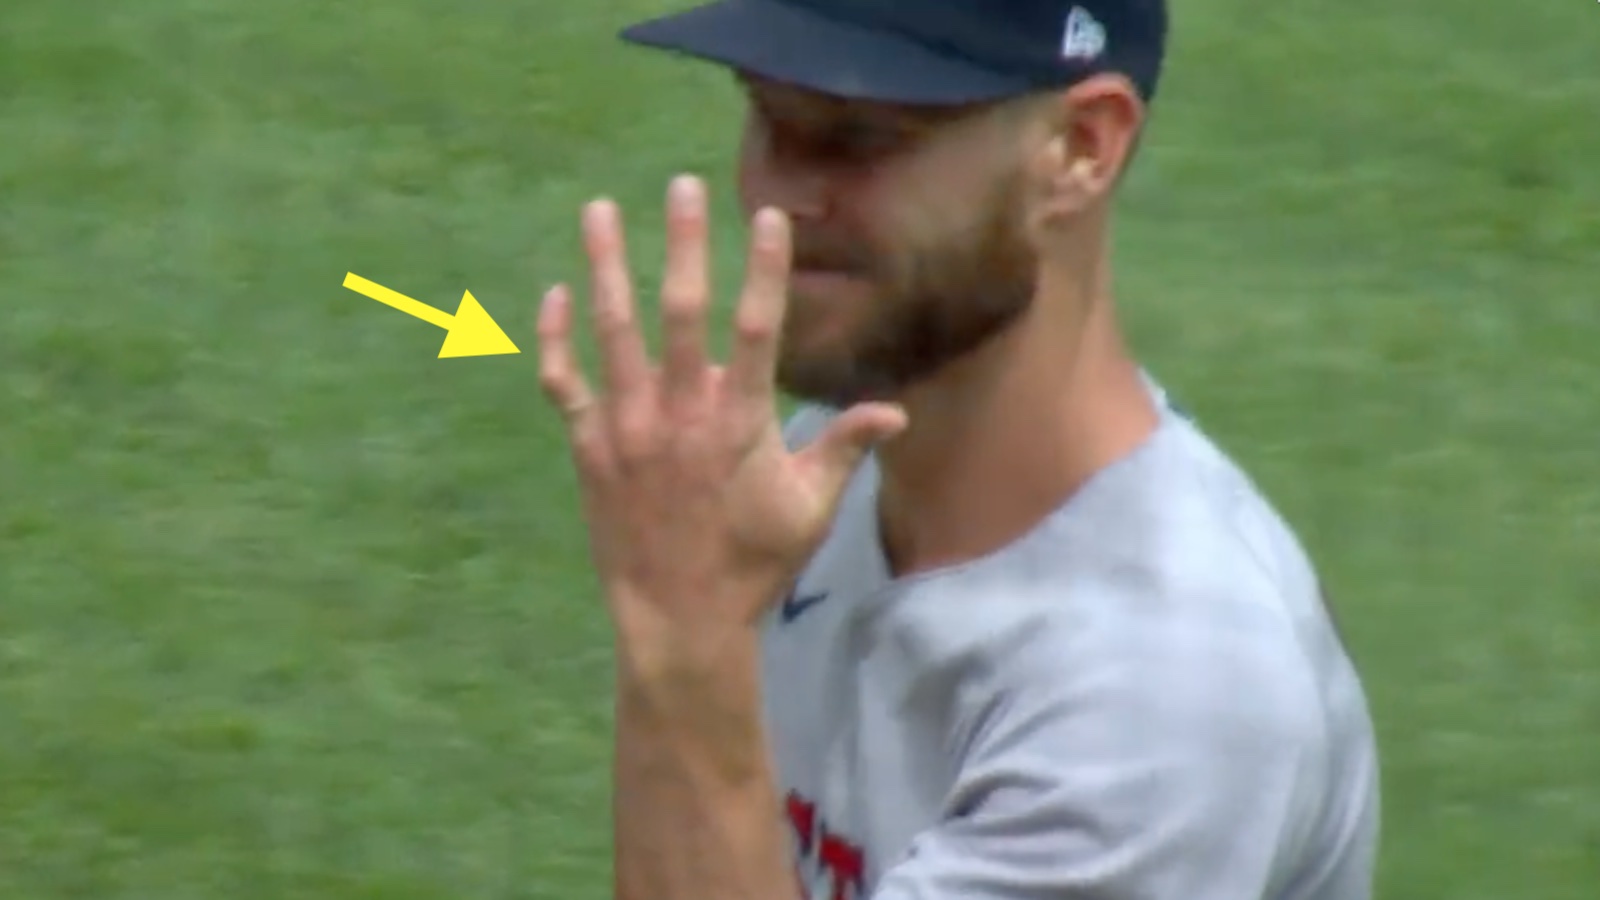 Video: Chris Sale exits game after line drive off pitching hand